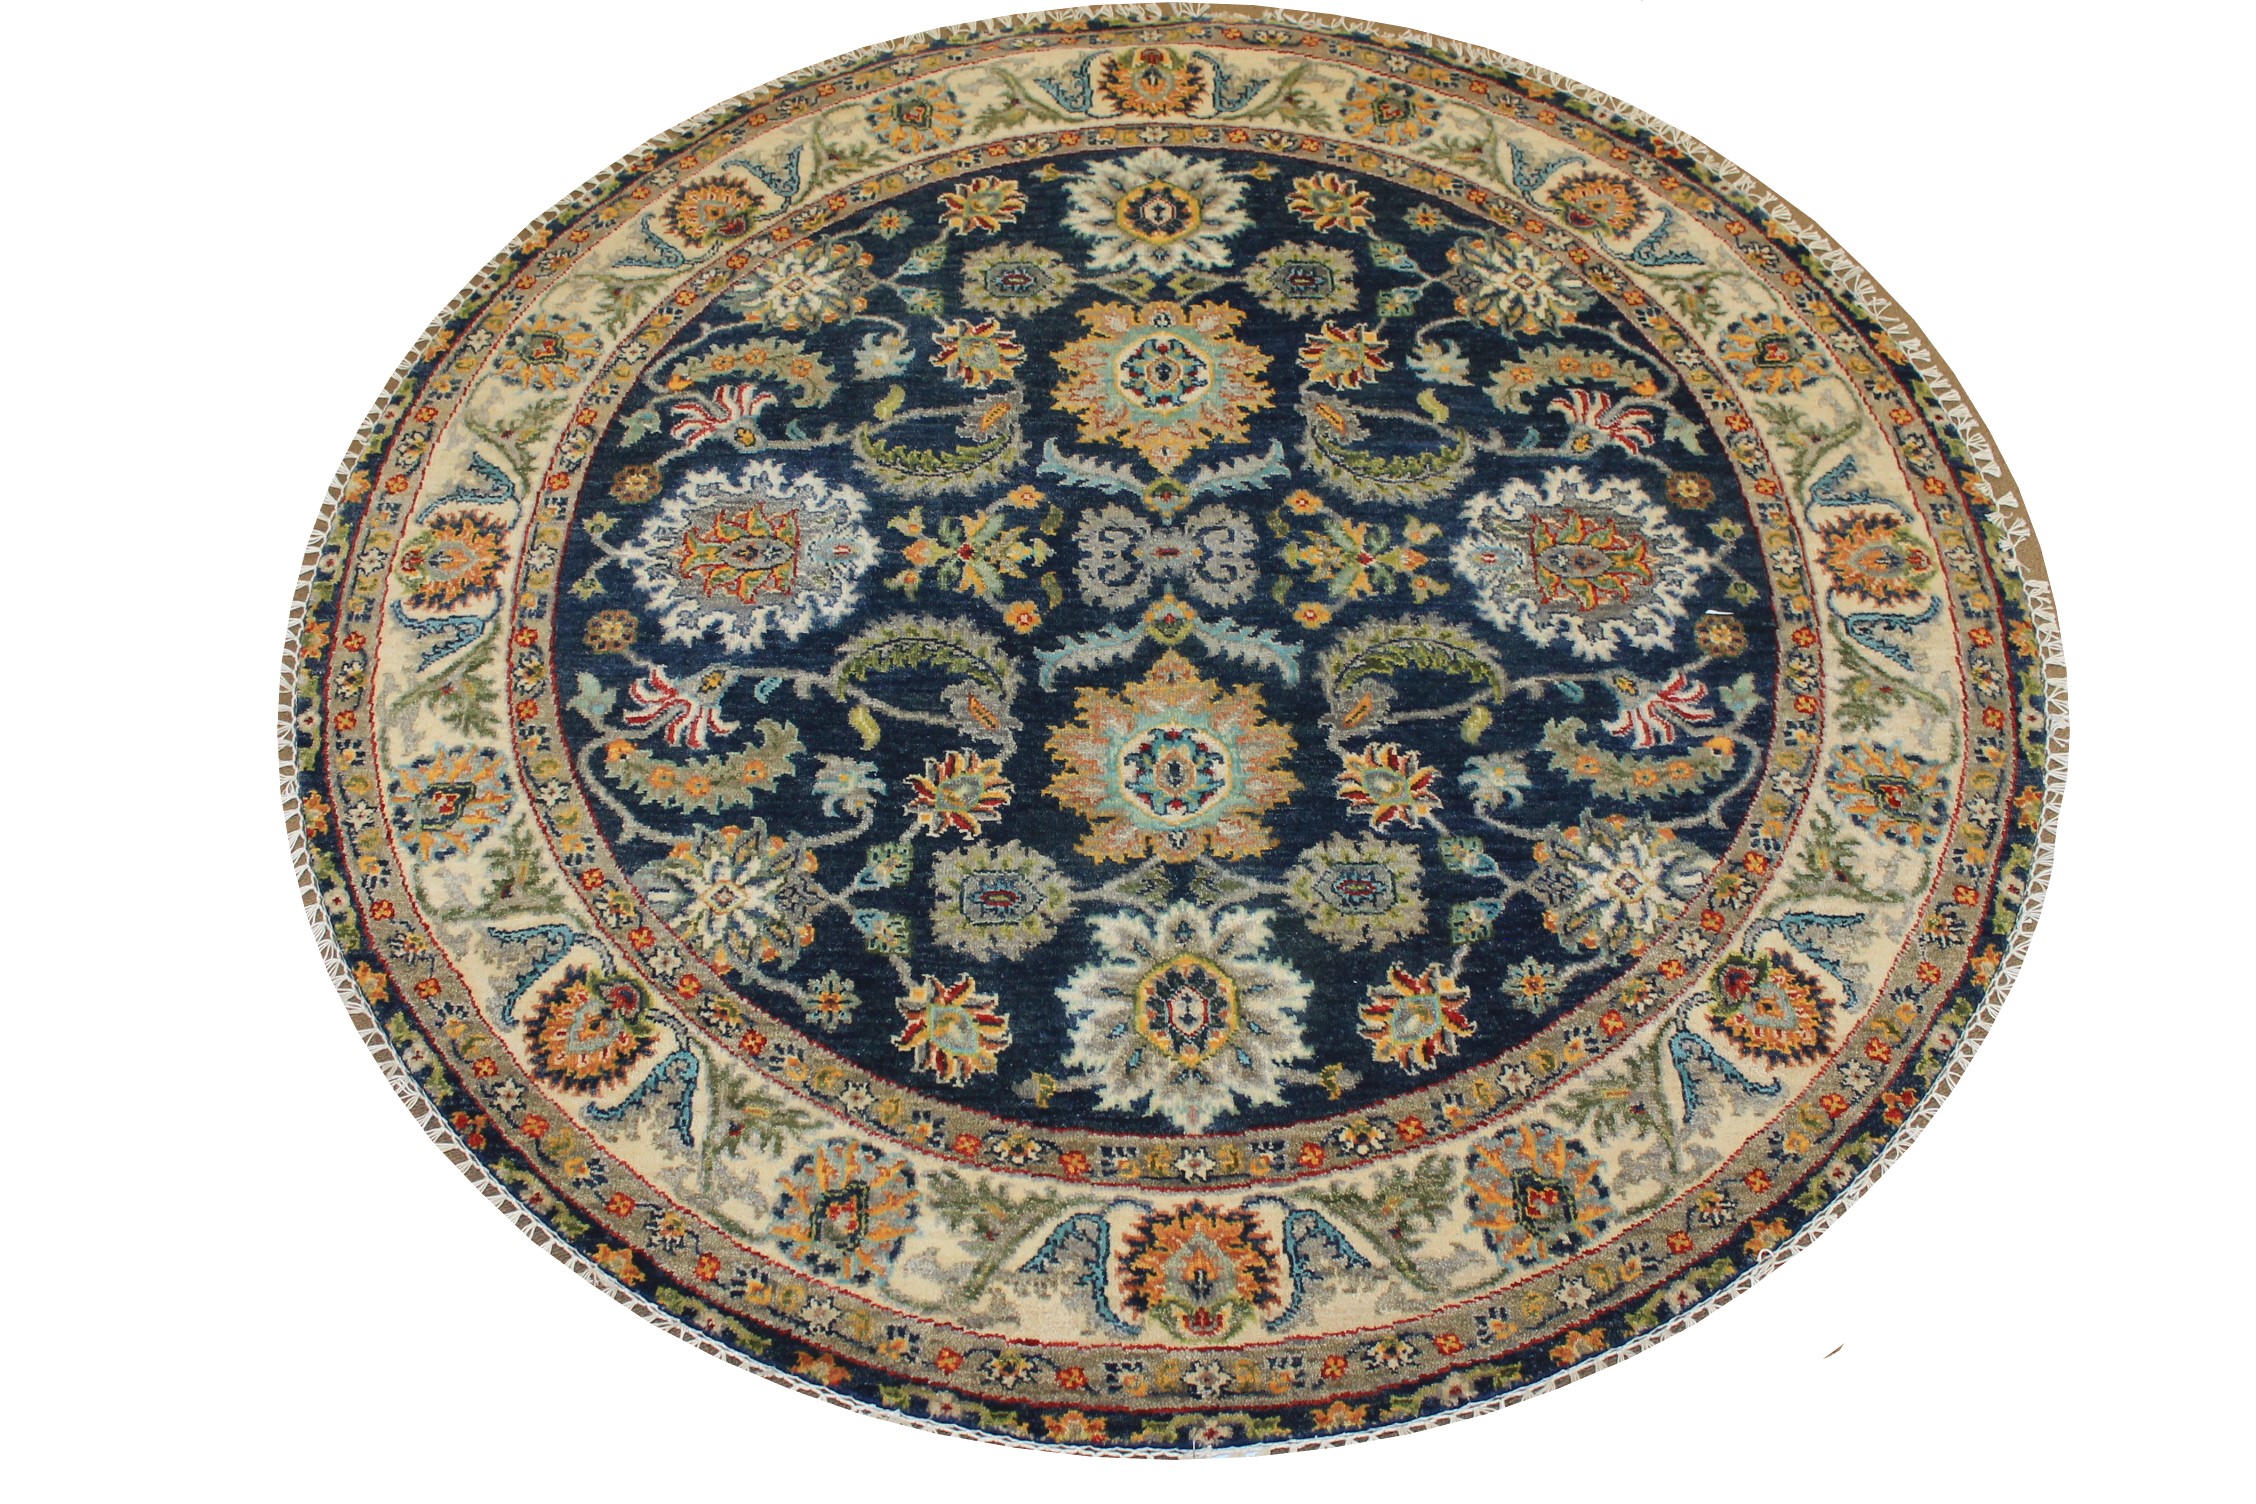 5 ft. Round & Square Traditional Hand Knotted Wool Area Rug - MR024744